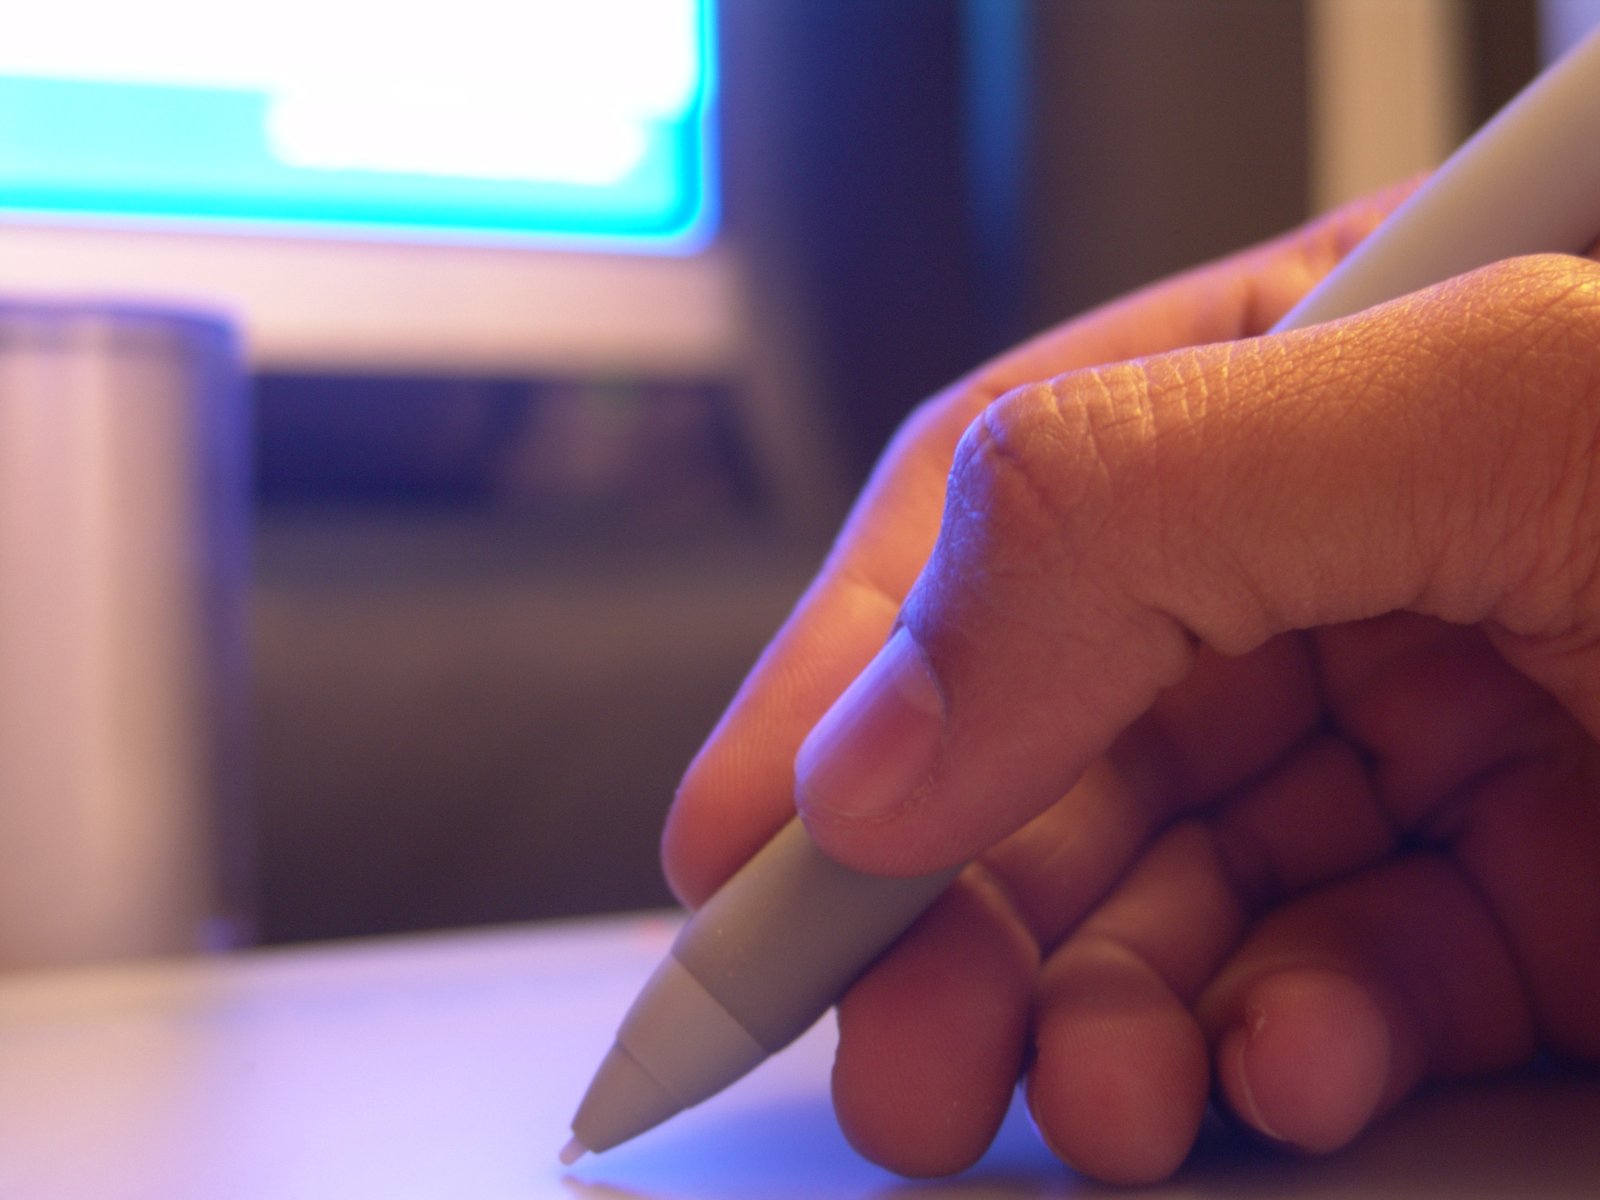 hand holding a white plastic pen next to computer keyboard